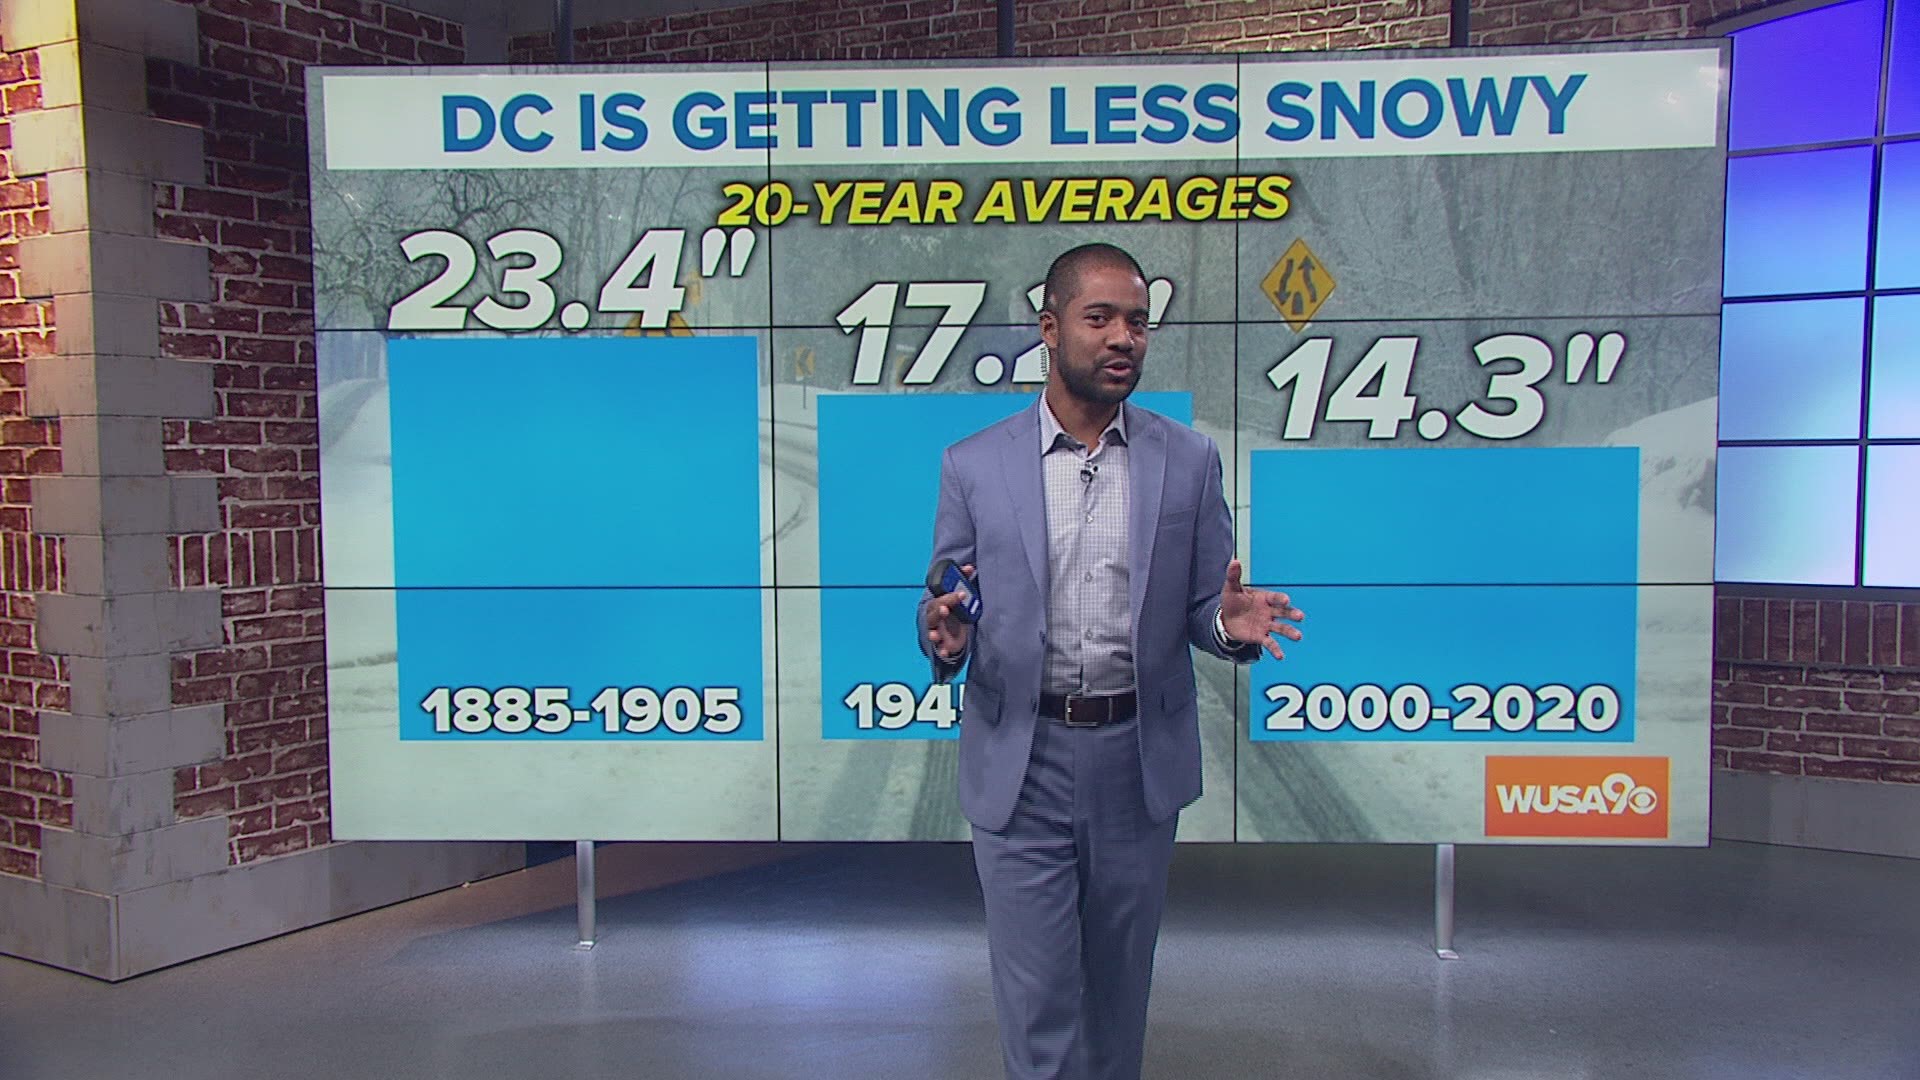 Snow amounts are trending down for D.C.